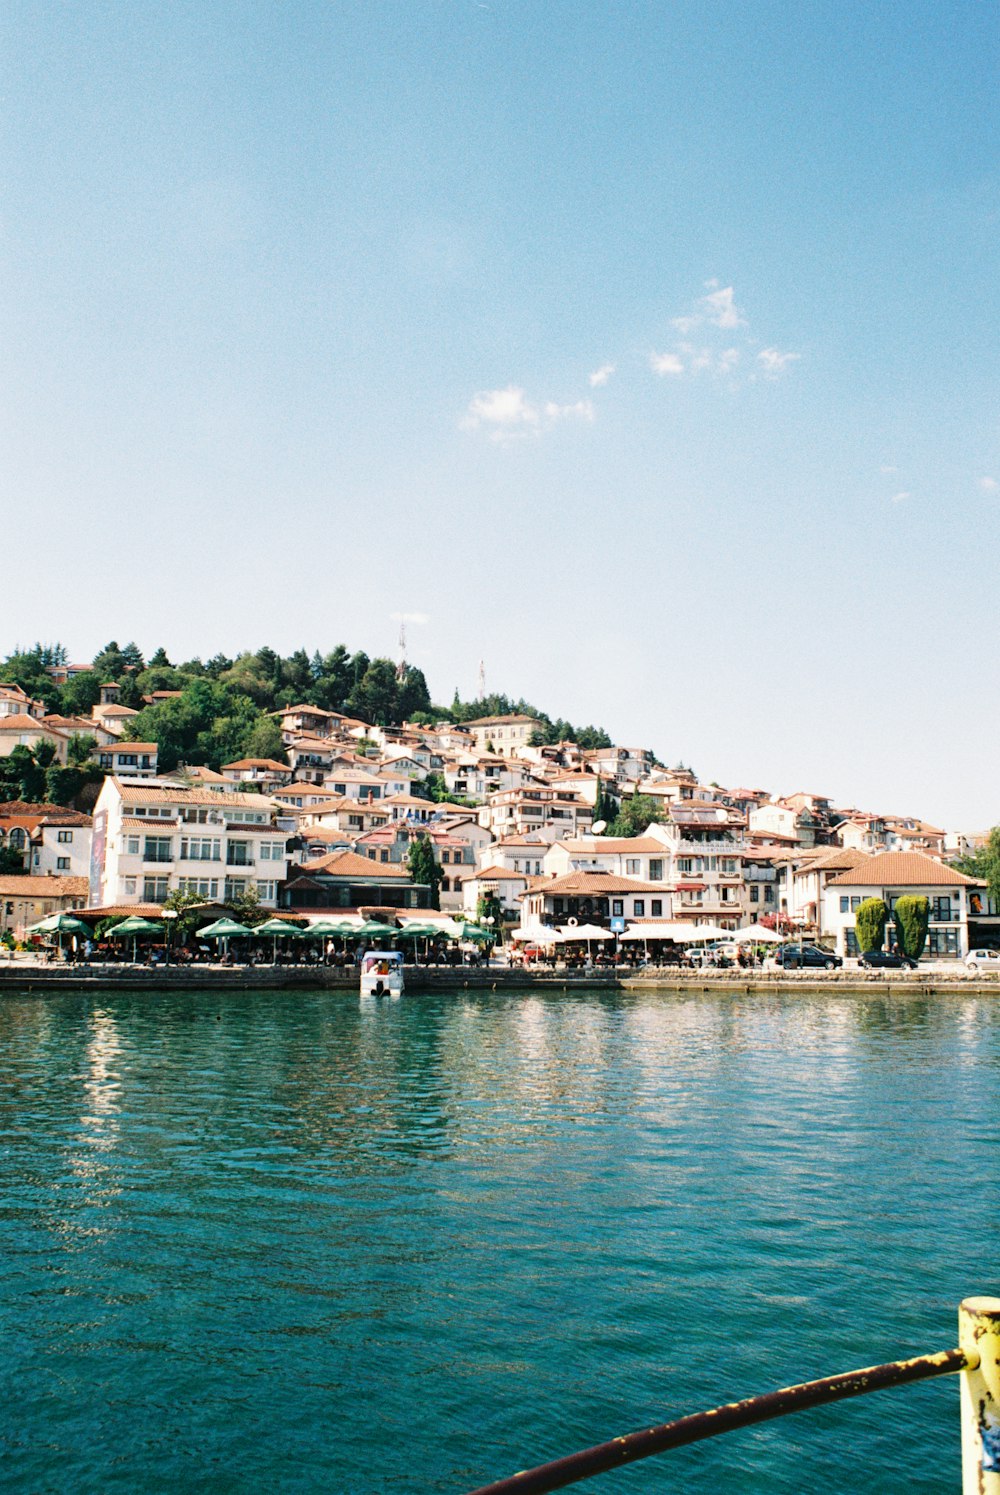 a view of a town from a boat on the water